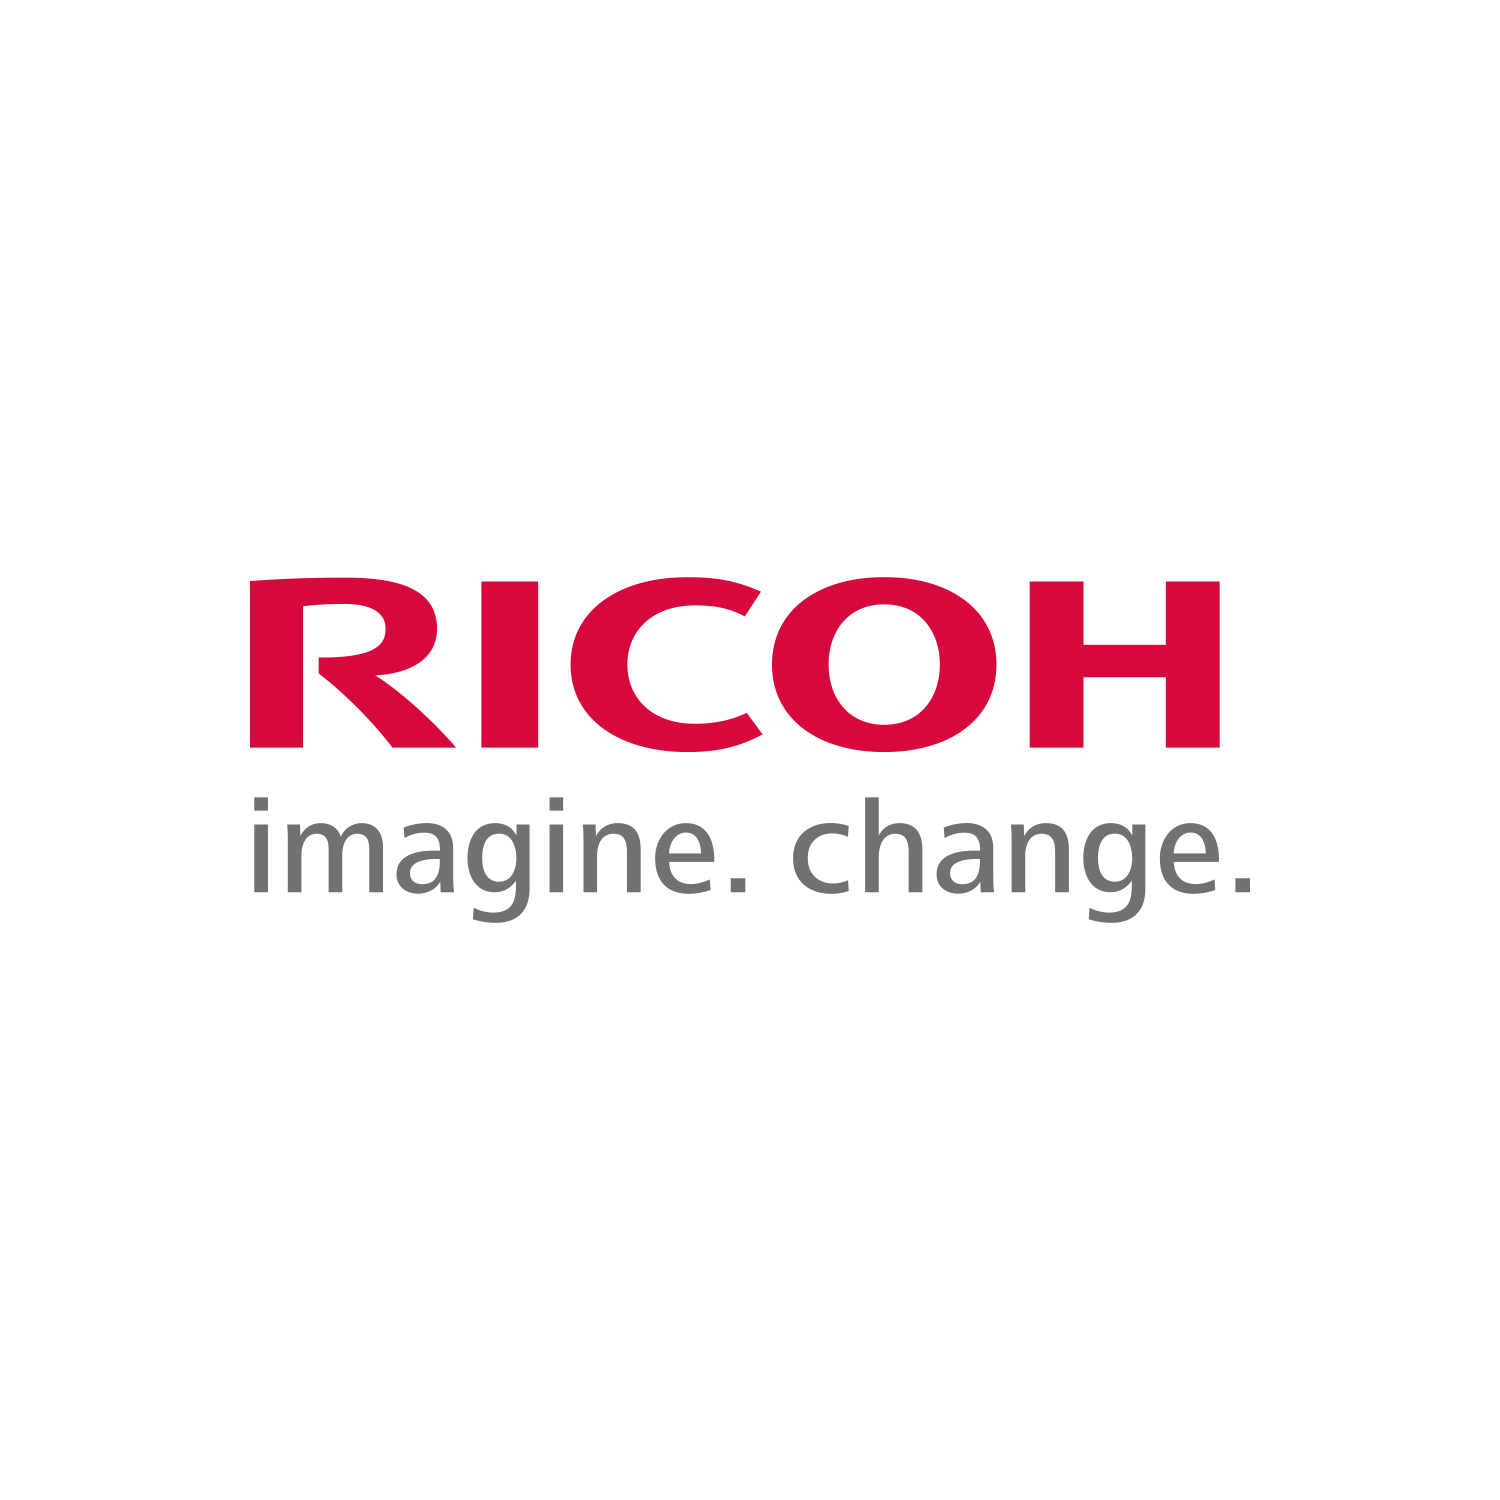 Information Security Training | Global | Ricoh